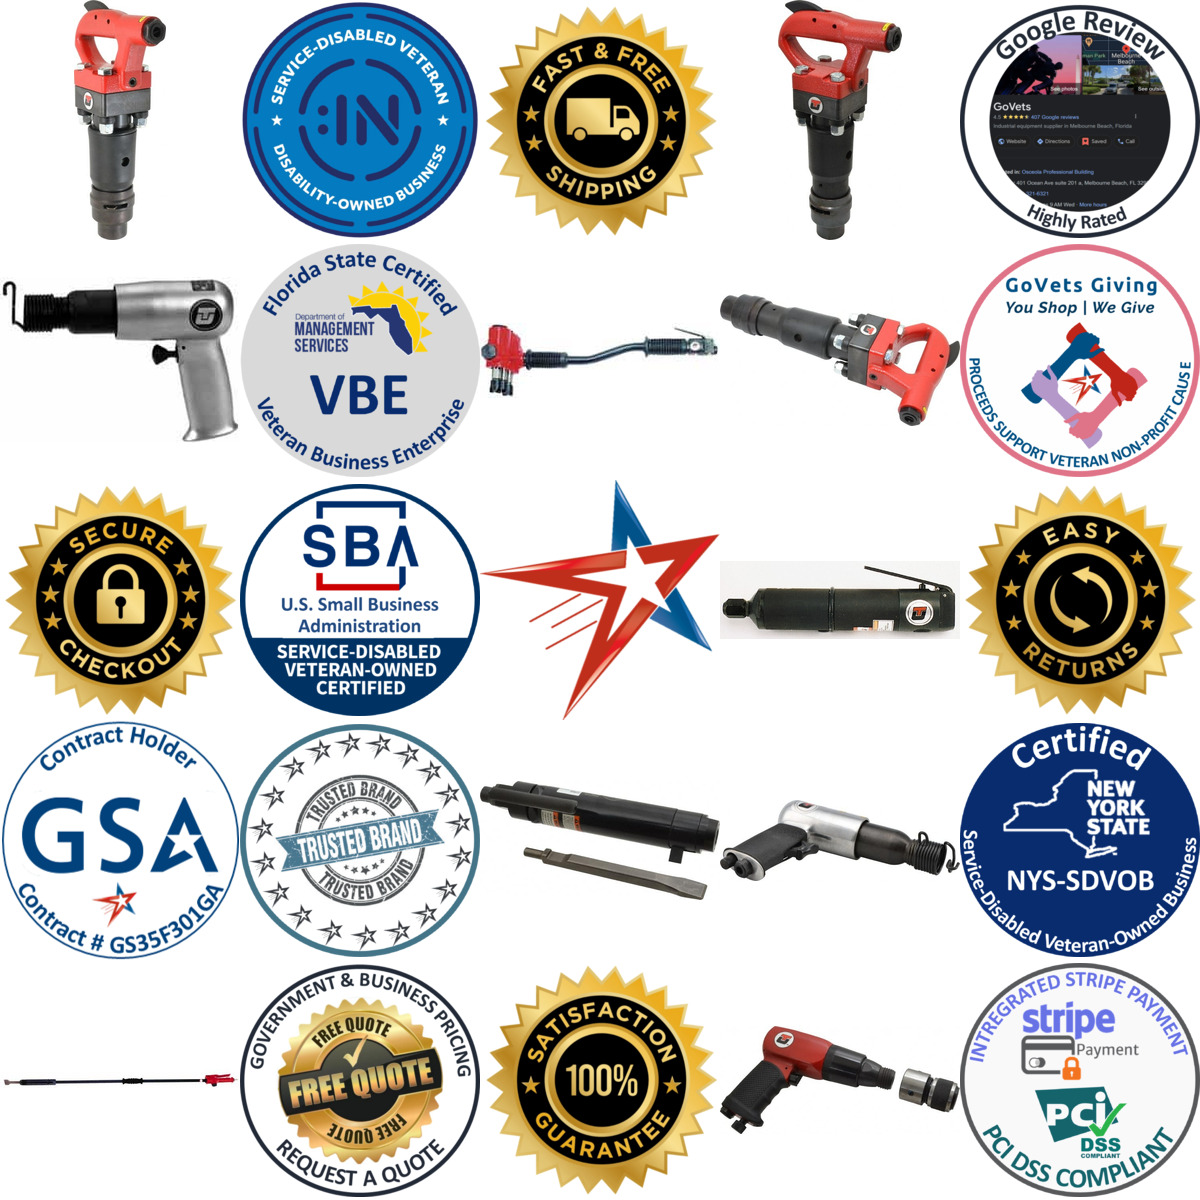 A selection of Universal Tool products on GoVets